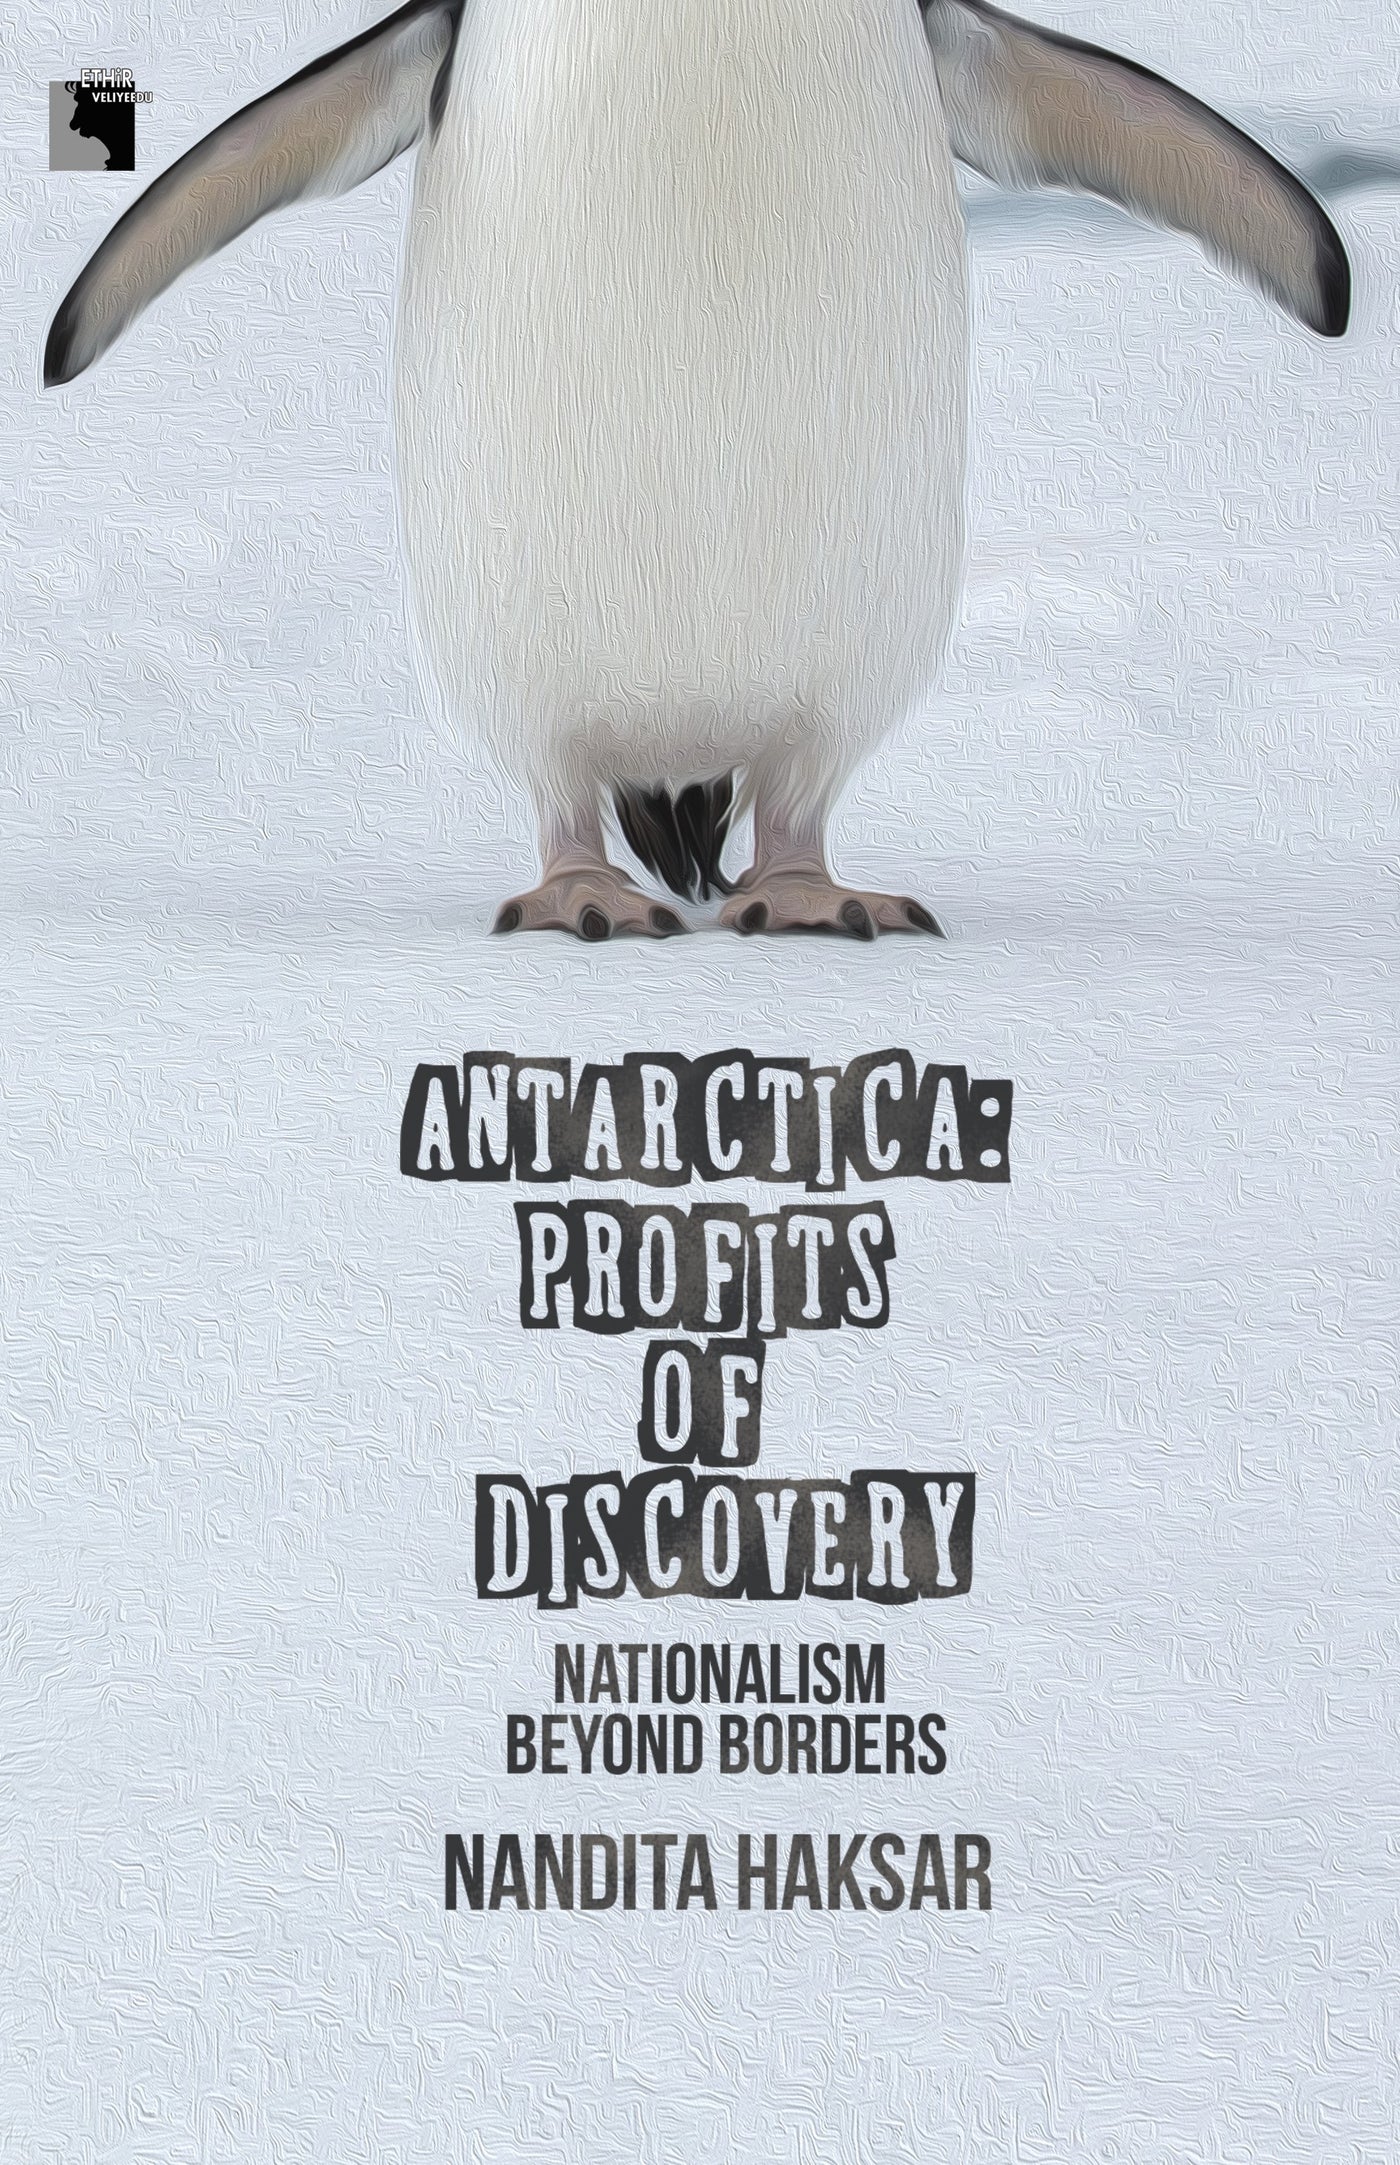 Antartica: Profits of Discovery